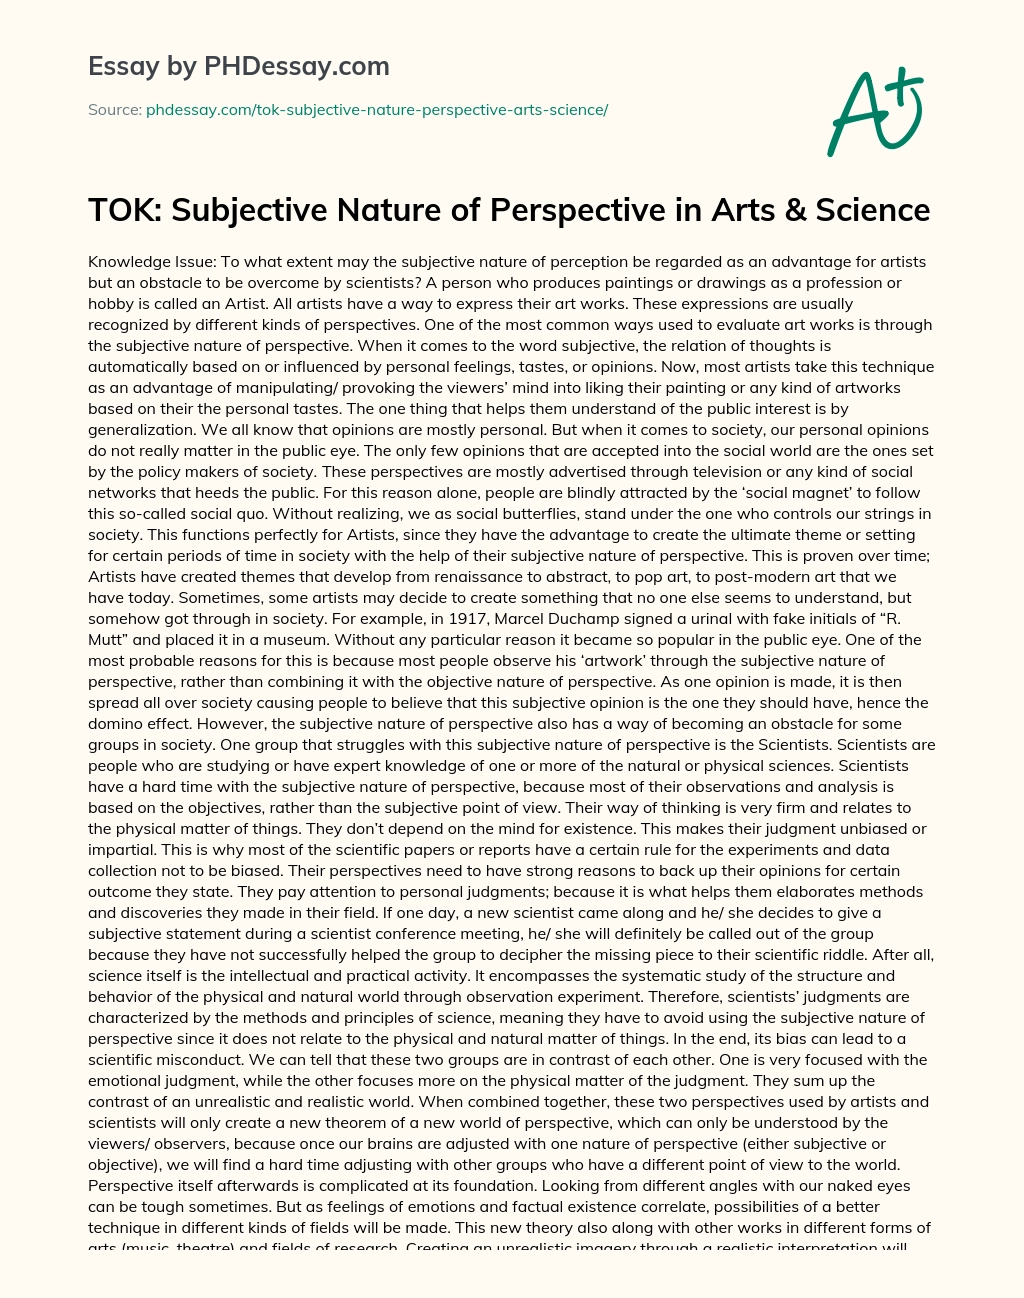 TOK: Subjective Nature of Perspective in Arts & Science essay